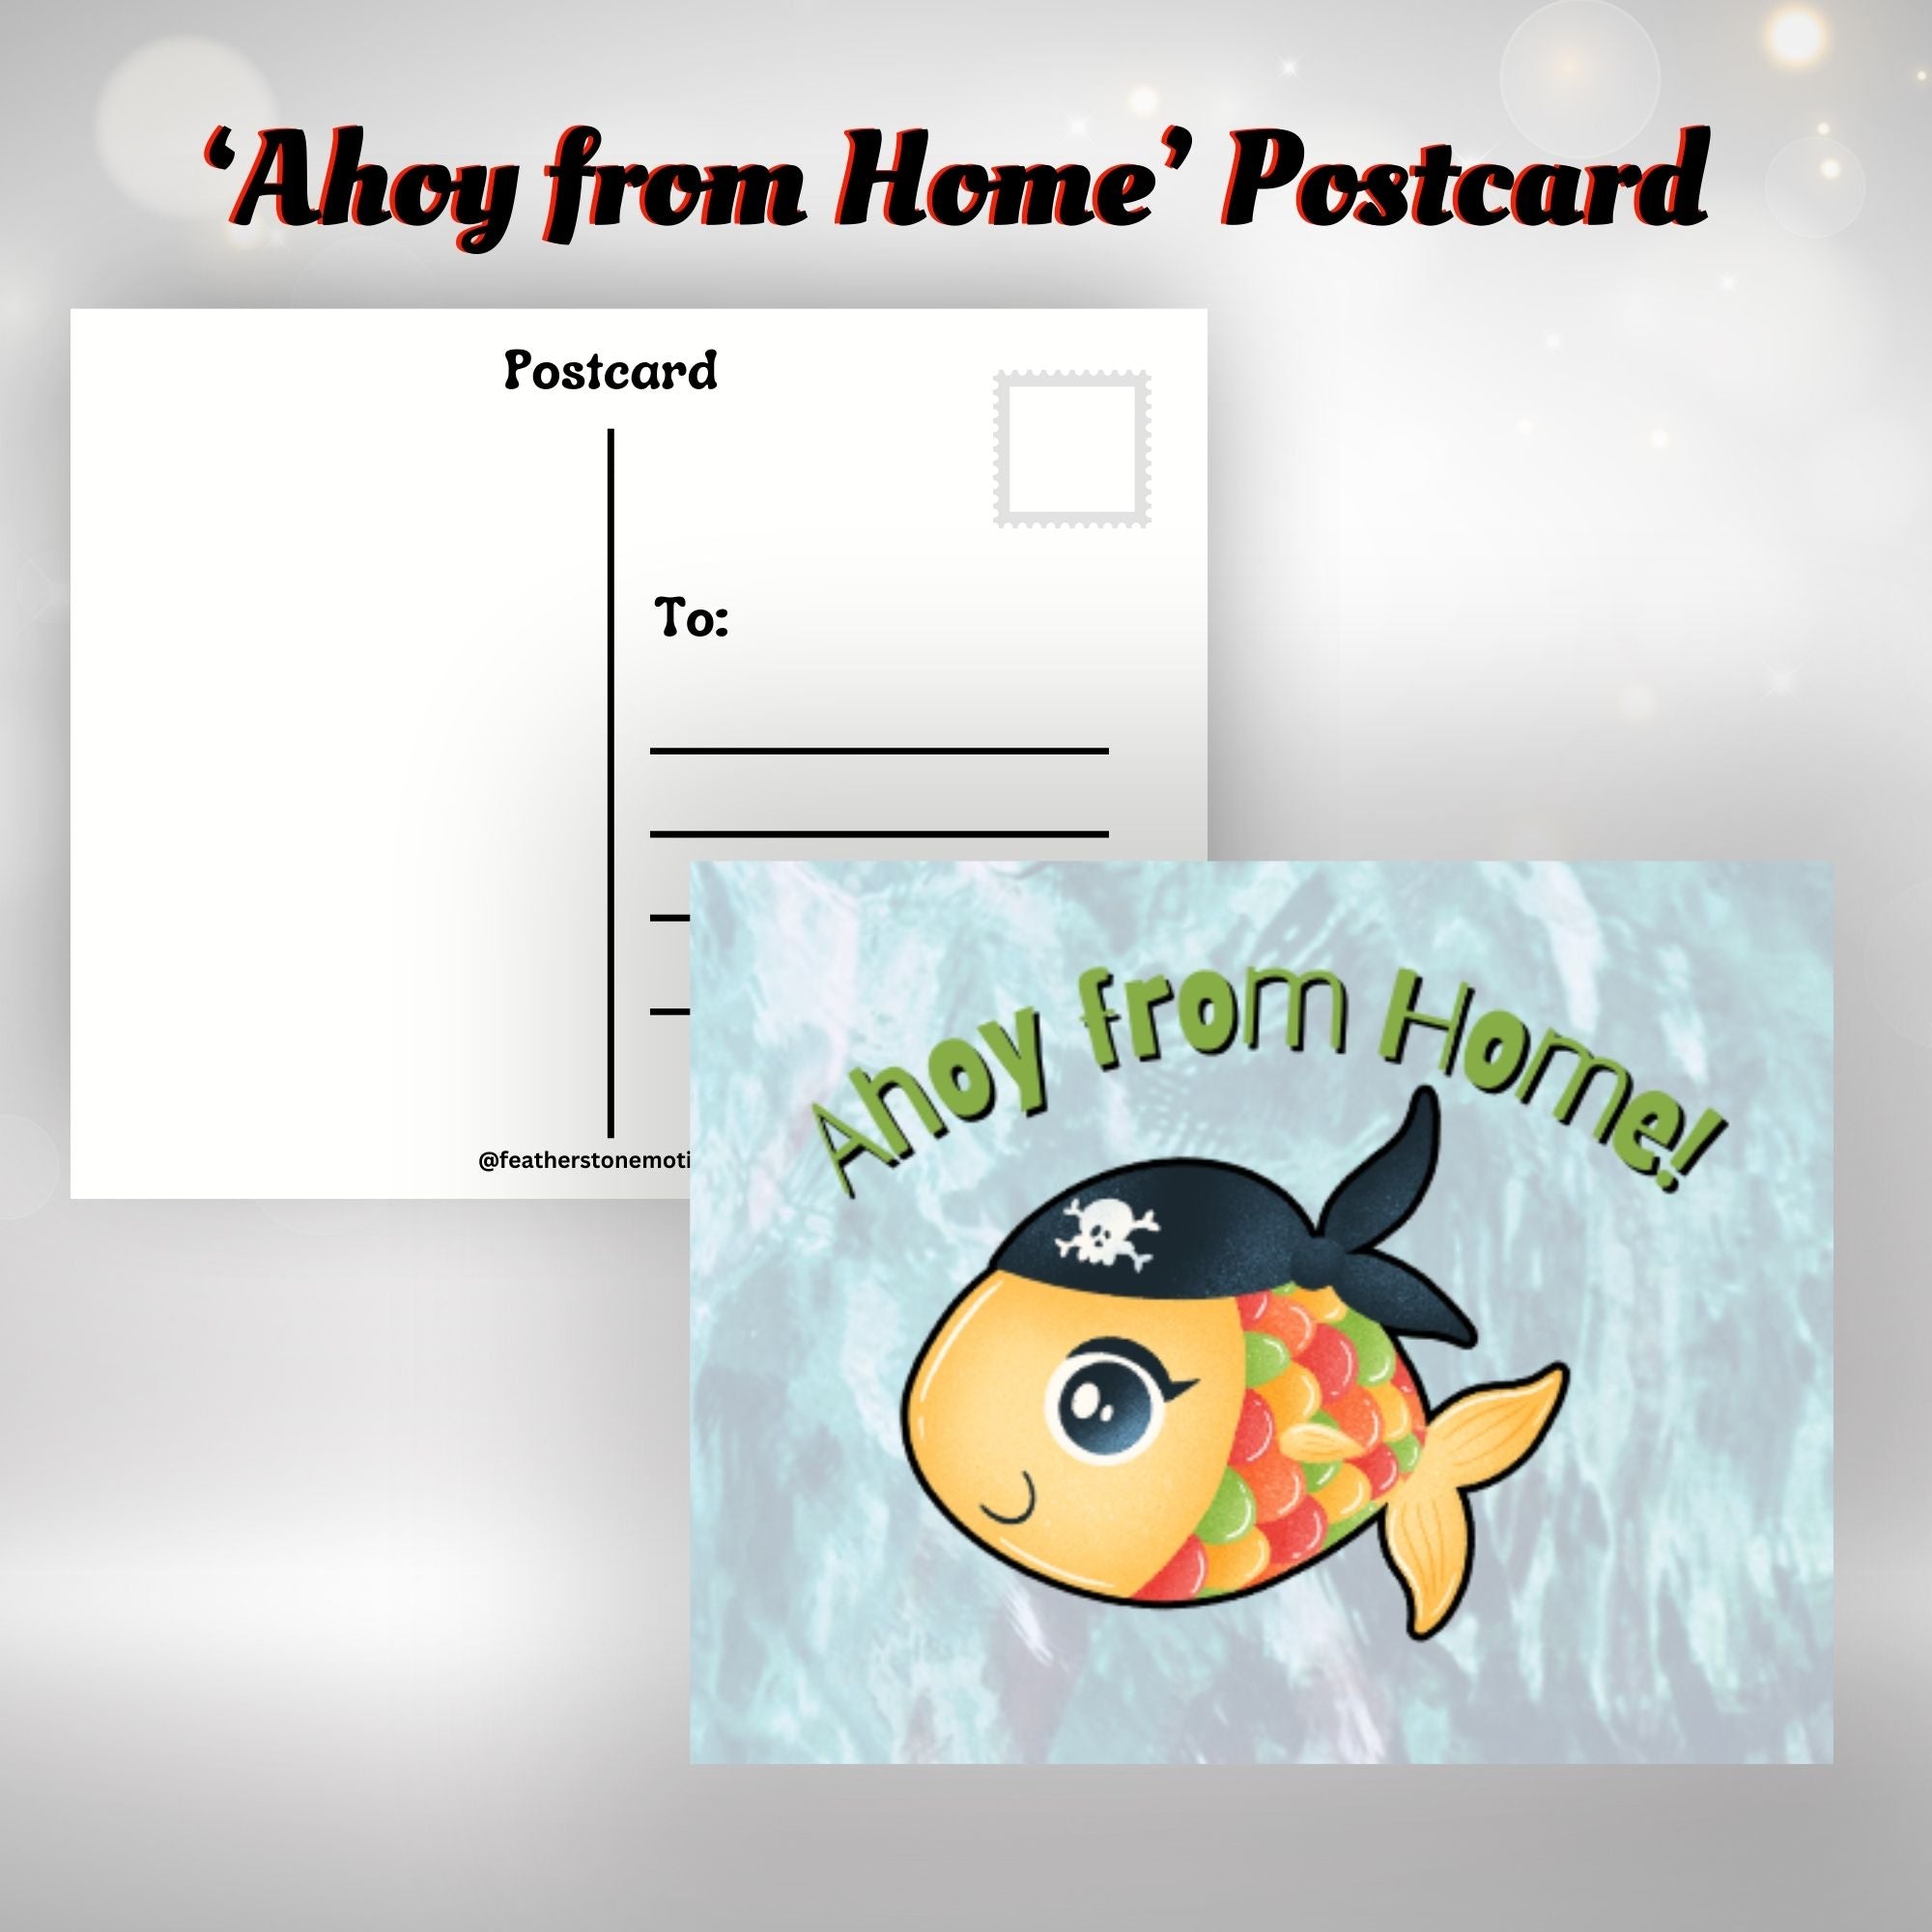 This image shows the Ahoy from Home! postcard with a pirate fish.